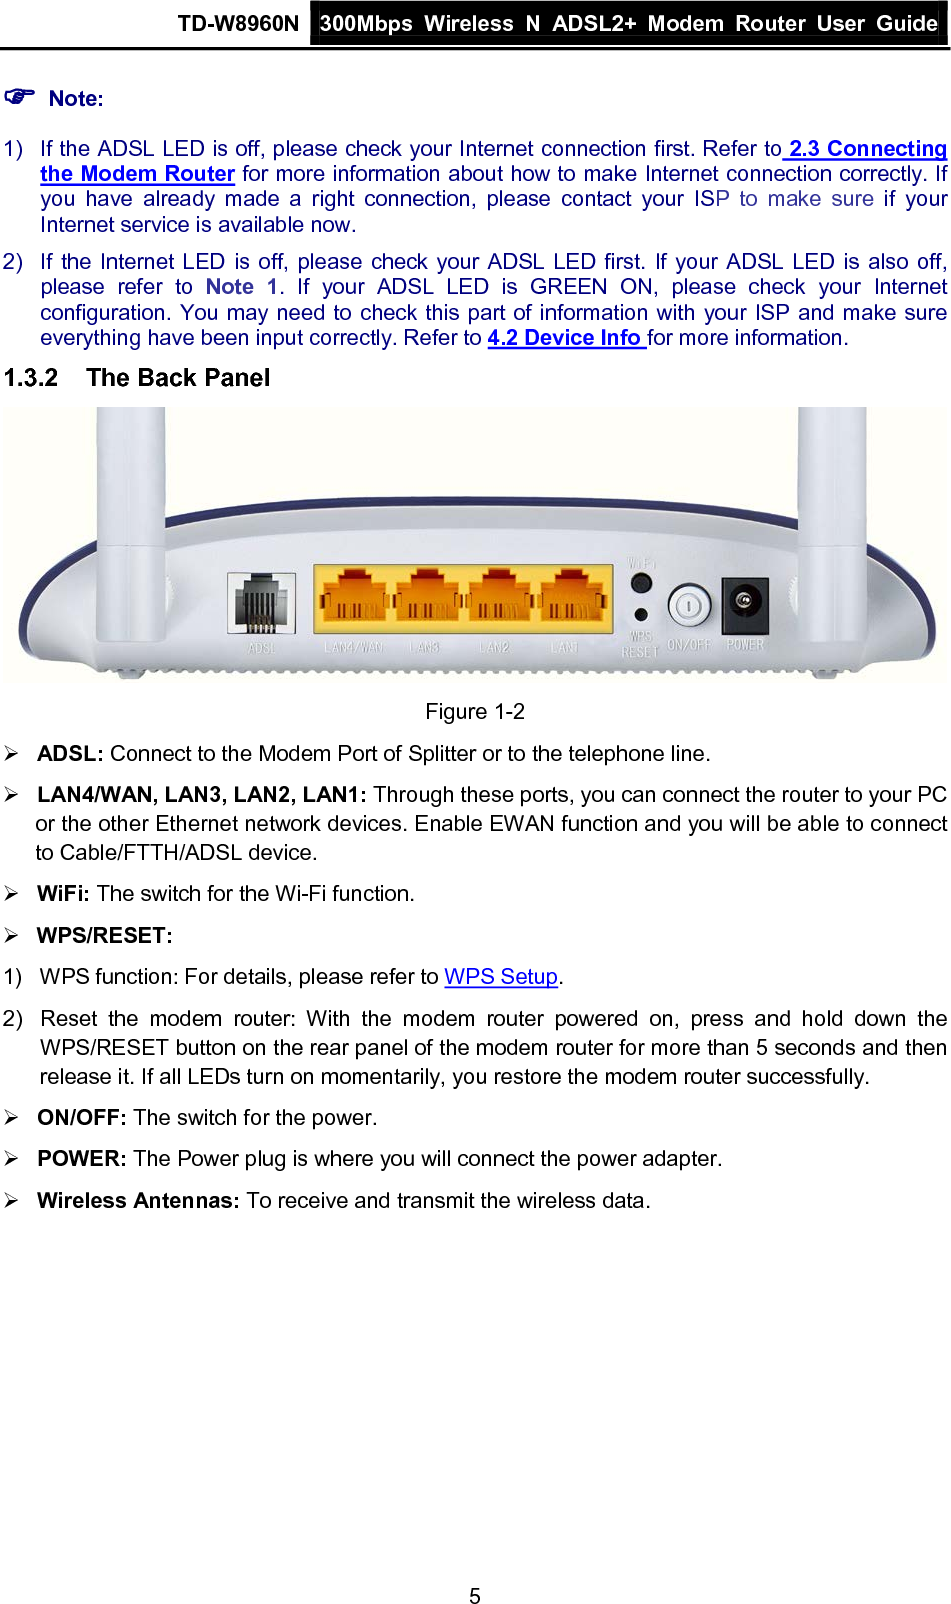 TD-W8960N 300Mbps Wireless  N  ADSL2+ Modem  Router  User Guide  5  Note: 1) If the ADSL LED is off, please check your Internet connection first. Refer to 2.3 Connecting the Modem Router for more information about how to make Internet connection correctly. If you have already made a right connection, please contact your ISP to make sure if your Internet service is available now. 2) If the Internet LED is off, please check your ADSL LED first. If your ADSL LED is also off, please refer to Note 1. If your ADSL LED is GREEN ON, please check your Internet configuration. You may need to check this part of information with your ISP and make sure everything have been input correctly. Refer to 4.2 Device Info for more information. 1.3.2 The Back Panel  Figure 1-2  ADSL: Connect to the Modem Port of Splitter or to the telephone line.  LAN4/WAN, LAN3, LAN2, LAN1: Through these ports, you can connect the router to your PC or the other Ethernet network devices. Enable EWAN function and you will be able to connect to Cable/FTTH/ADSL device.  WiFi: The switch for the Wi-Fi function.  WPS/RESET:   1) WPS function: For details, please refer to WPS Setup. 2) Reset the modem router: With the modem router powered on, press and hold down the WPS/RESET button on the rear panel of the modem router for more than 5 seconds and then release it. If all LEDs turn on momentarily, you restore the modem router successfully.  ON/OFF: The switch for the power.  POWER: The Power plug is where you will connect the power adapter.  Wireless Antennas: To receive and transmit the wireless data. 